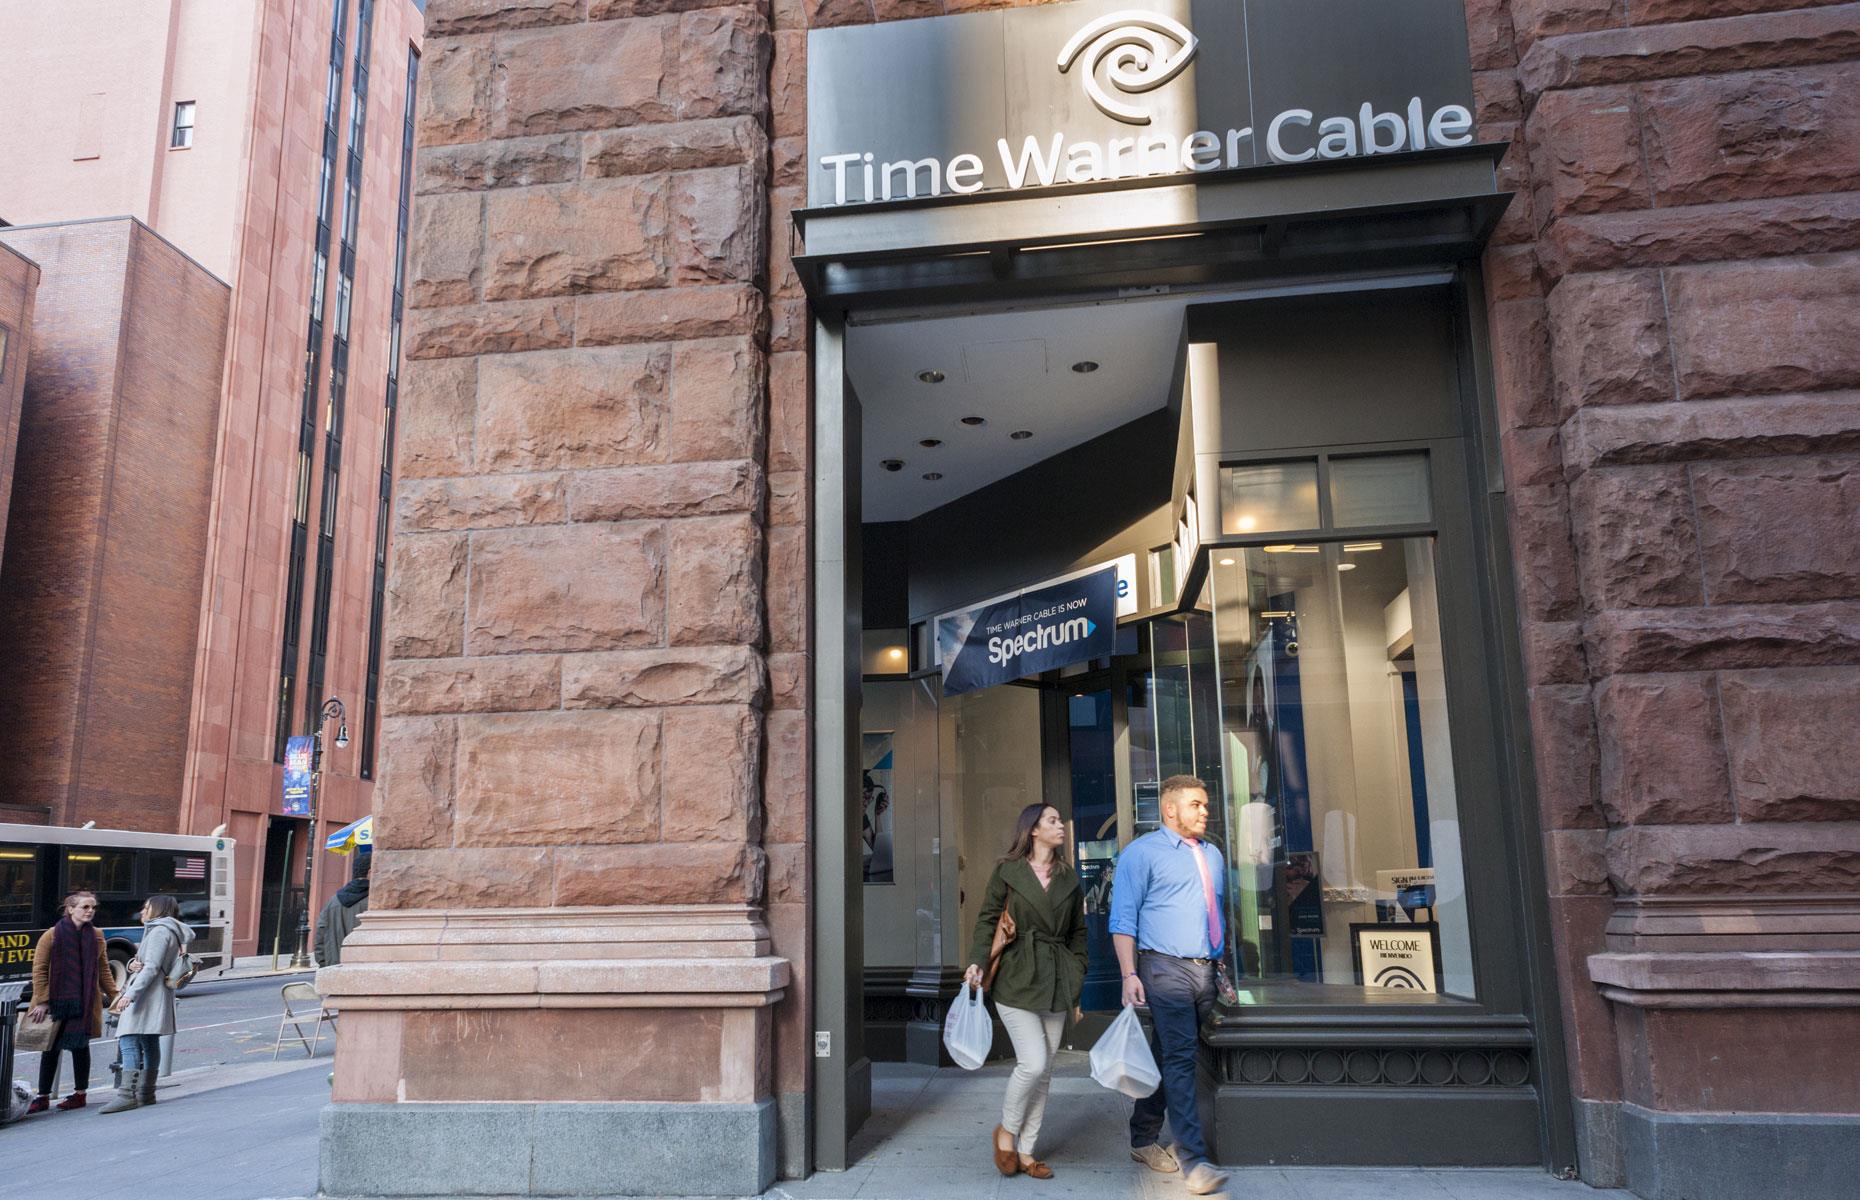 18. Charter Communications & Time Warner Cable in 2015: $83.19 billion (£62.63bn)